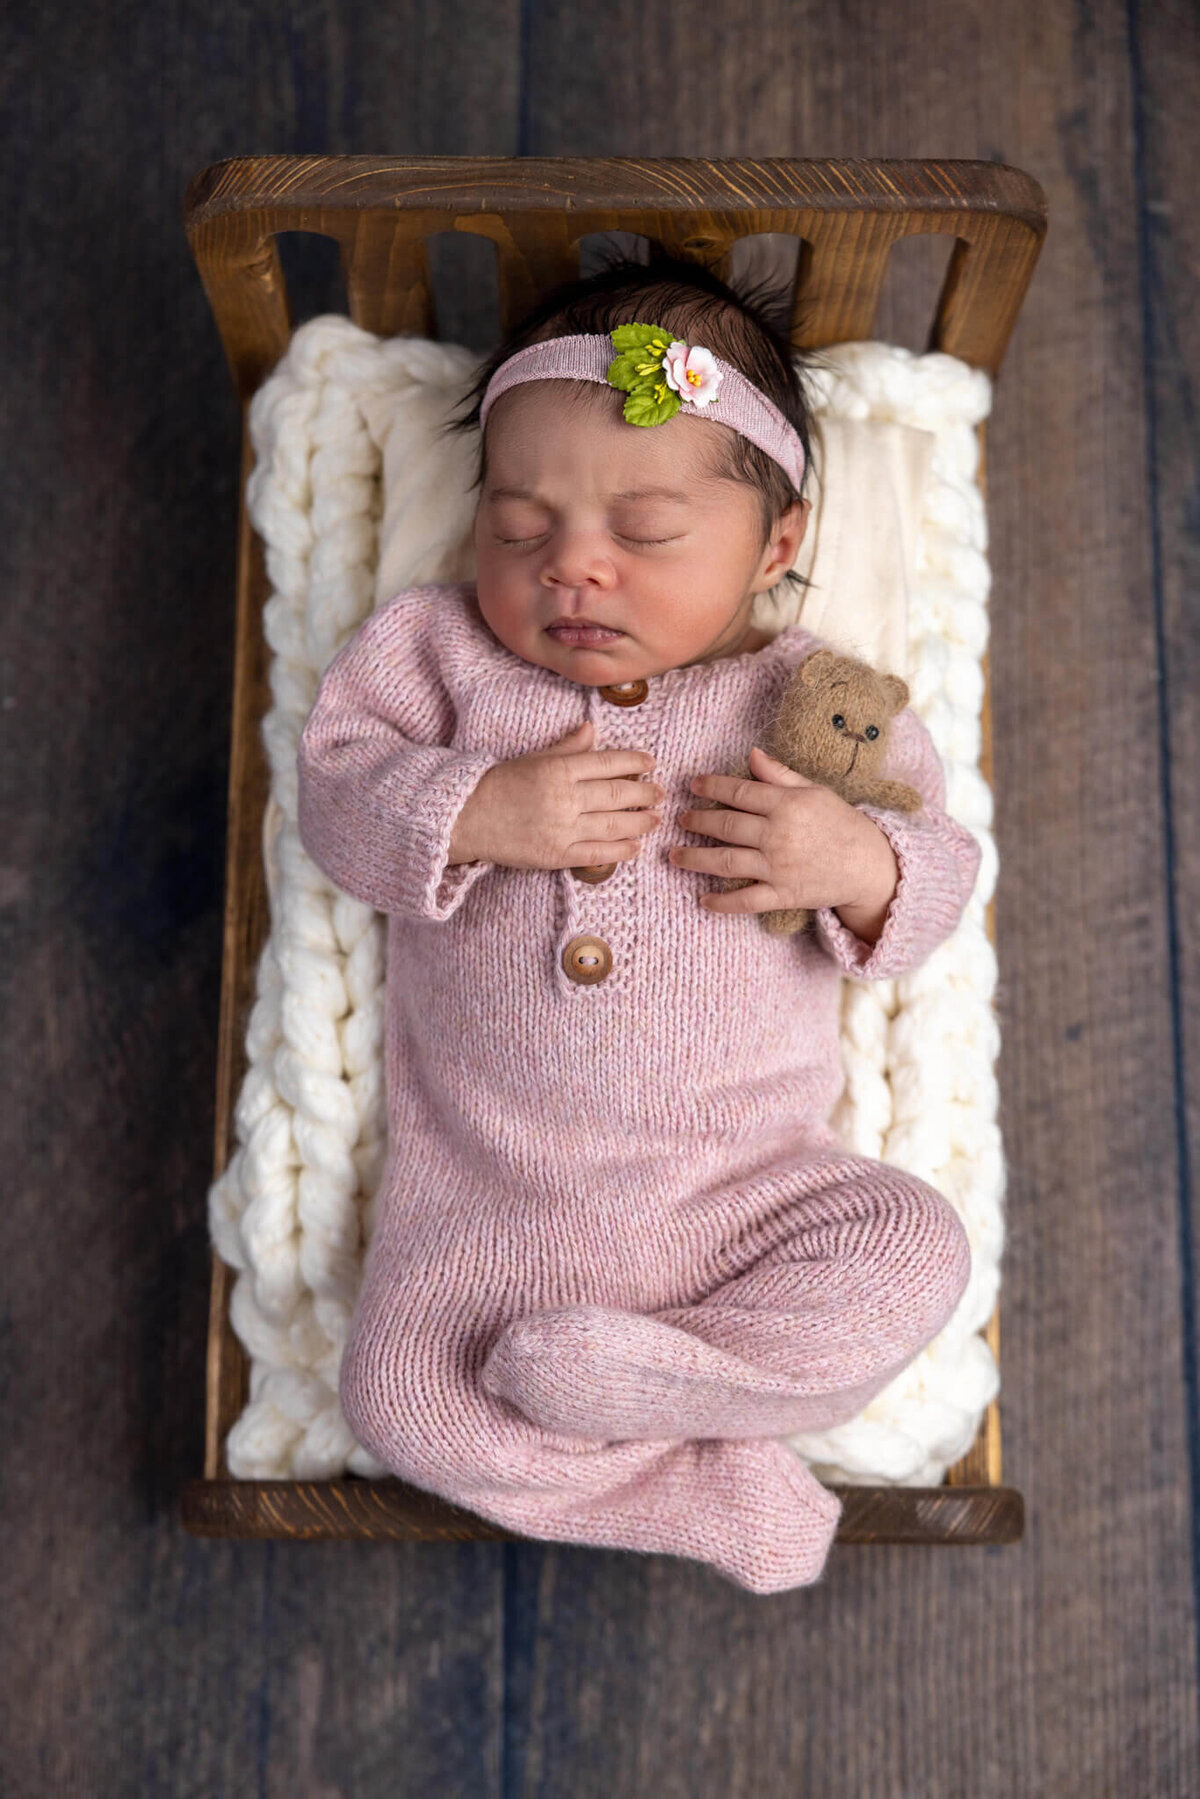 newborn baby with dark hair in a knitted pink romper asleep on a tiny wooden bed holding a tiny teddy bear